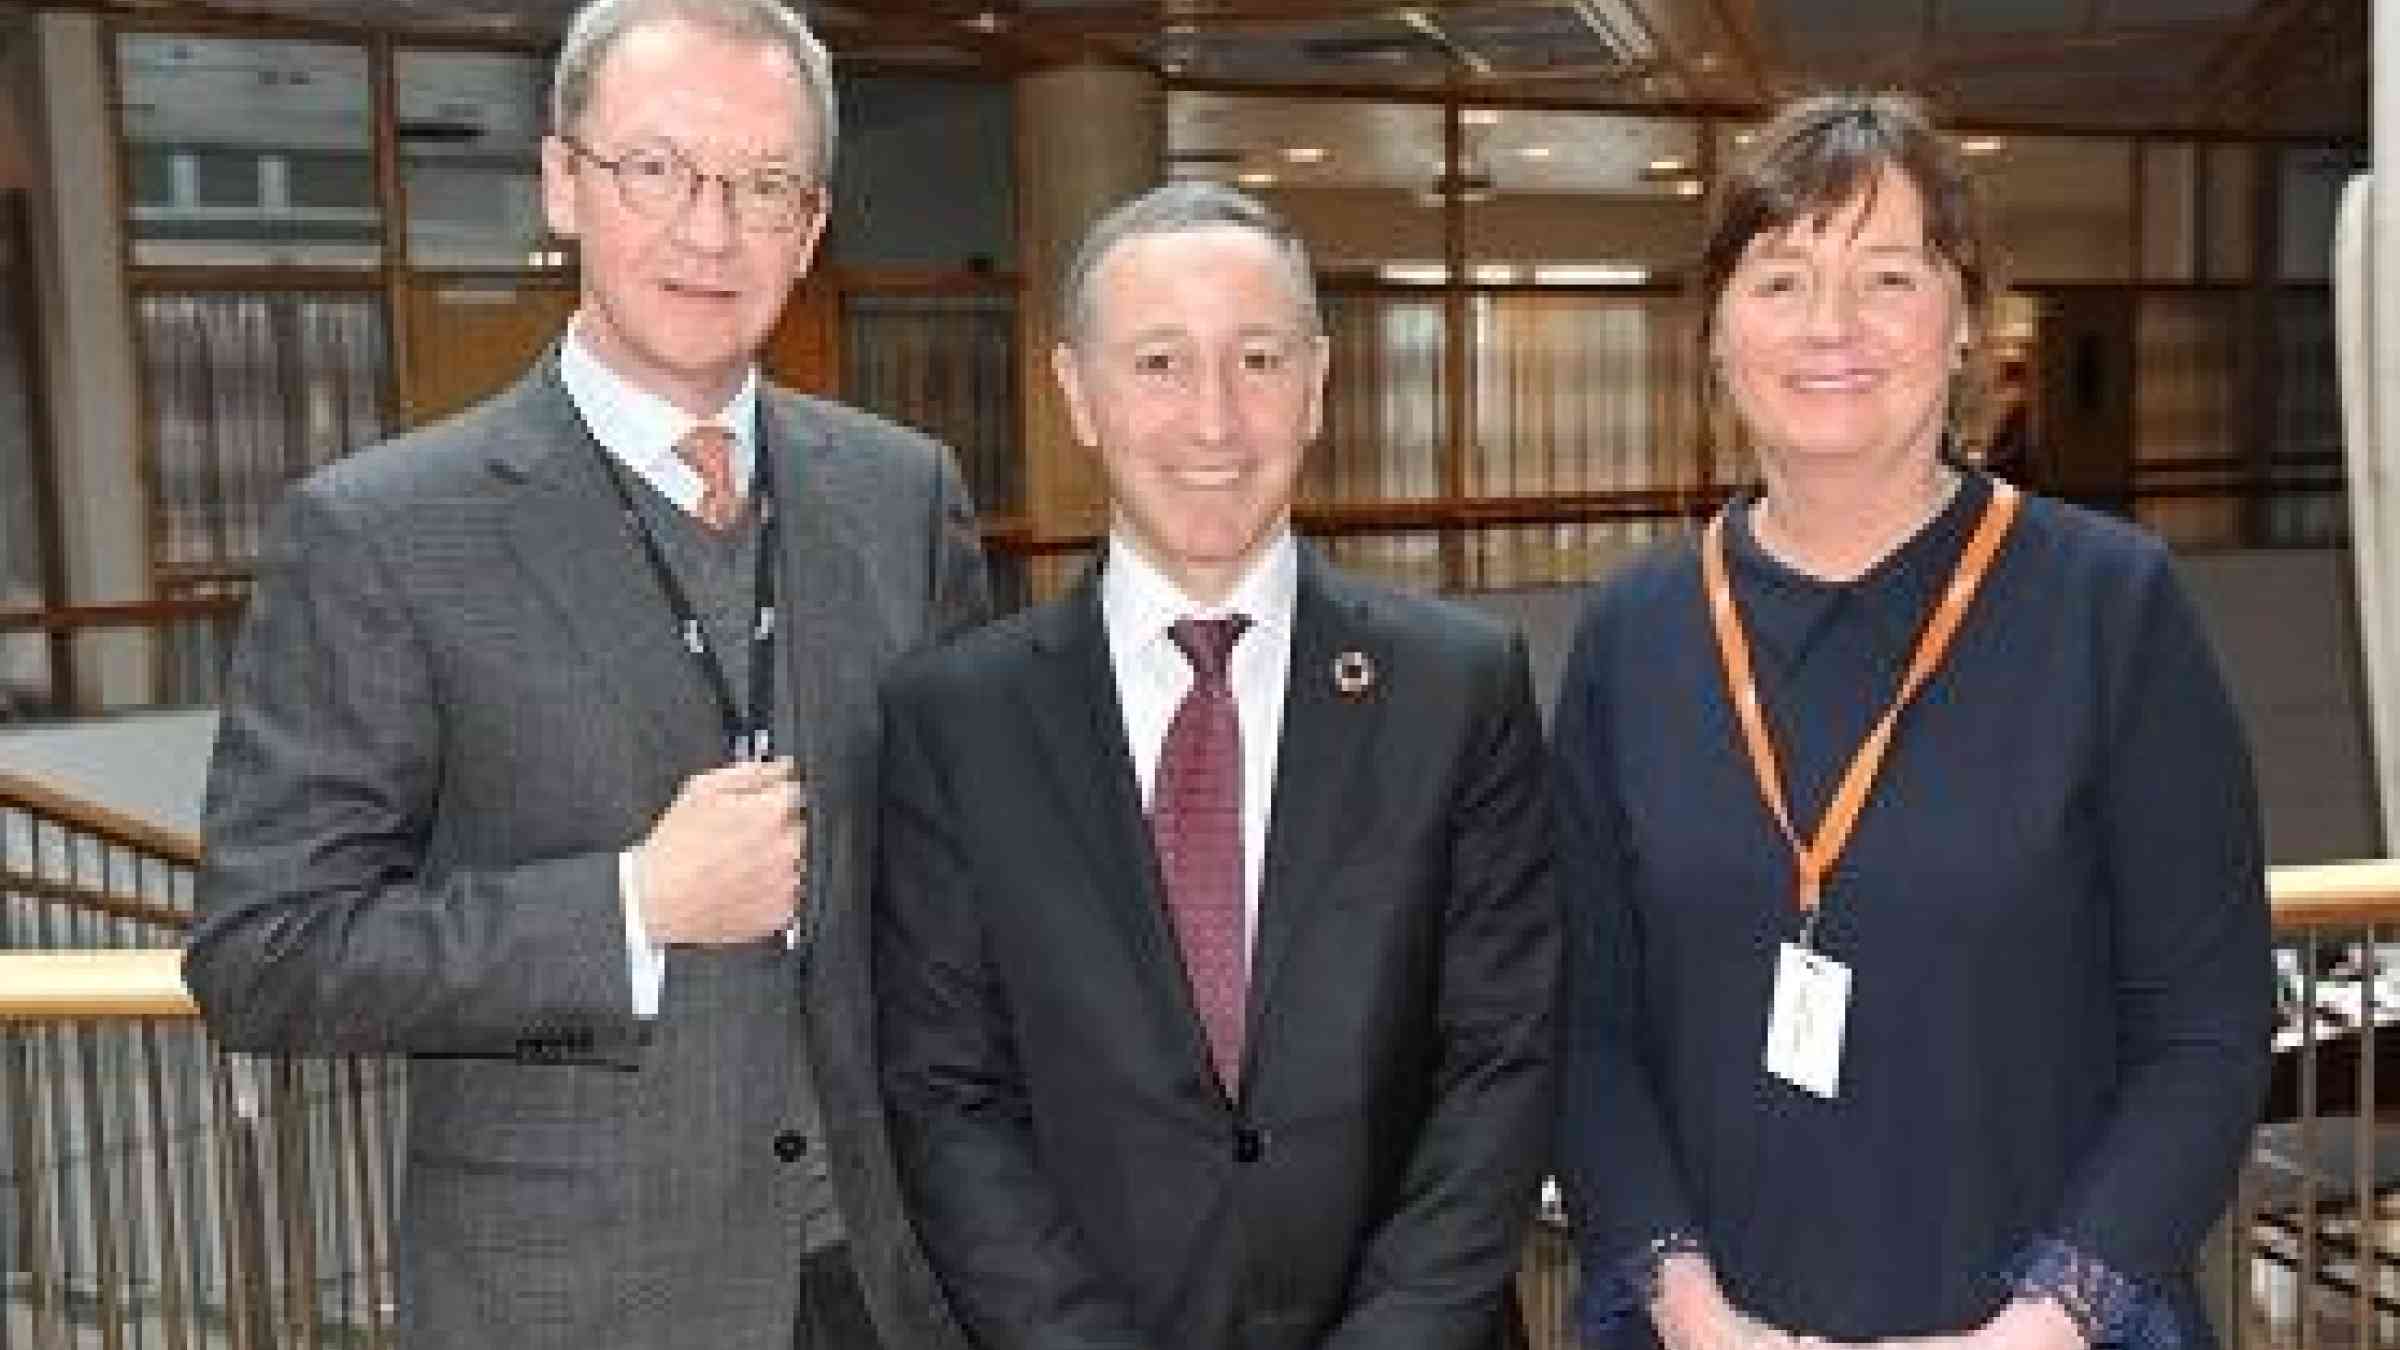 (from left) Idar Kreutzer, CEO of Finance Norway,  Robert Glasser, head of UNISDR, and Cecilie Daae, Director, Norwegian Directorate for Civil Protection (DSB)